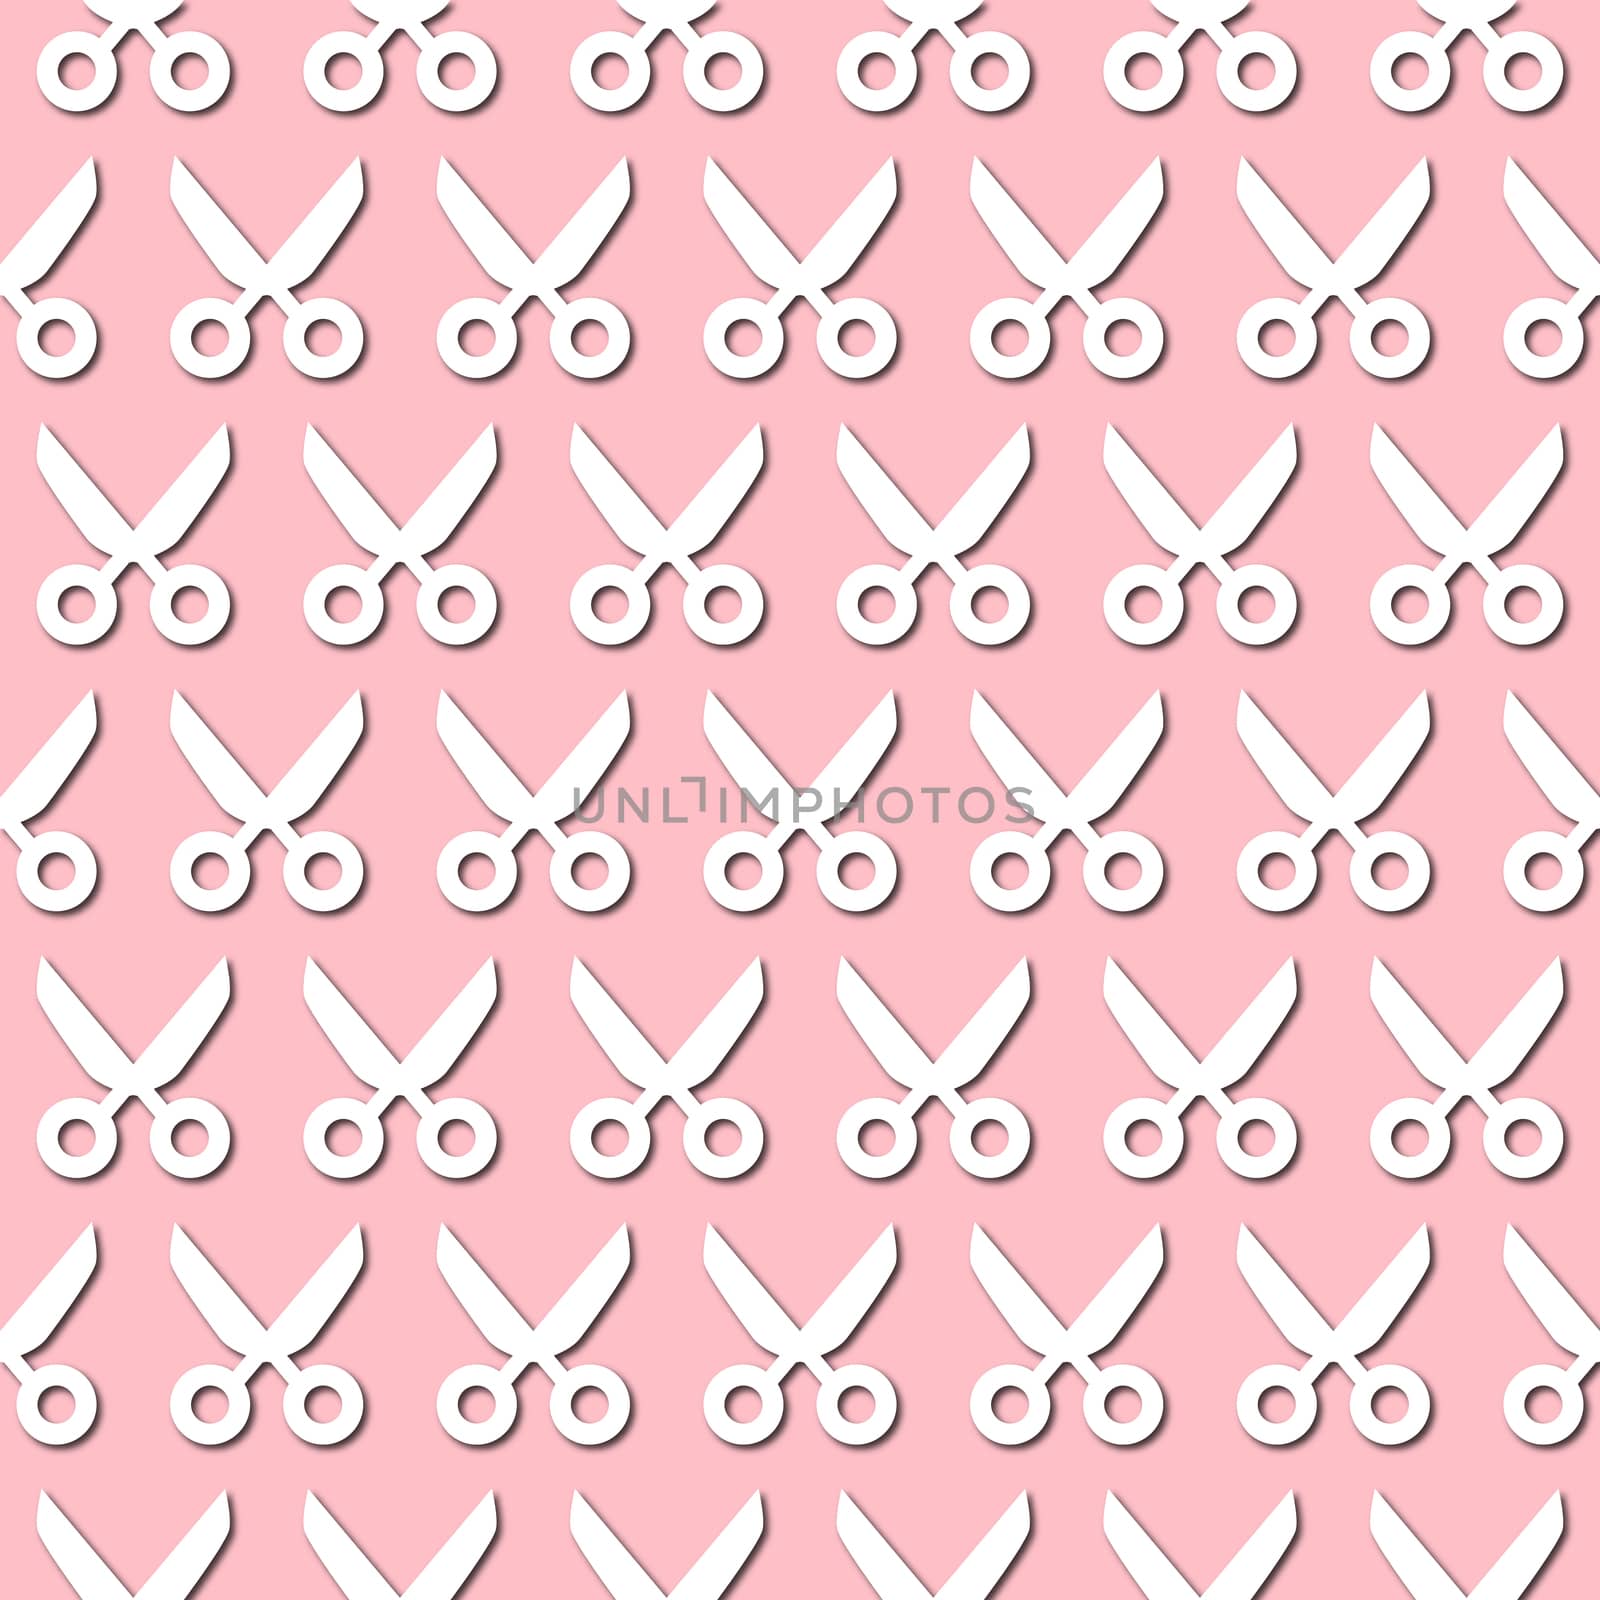 White scissors icon on pale pink background, seamless pattern. Paper cut style with drop shadows by Pashchenko